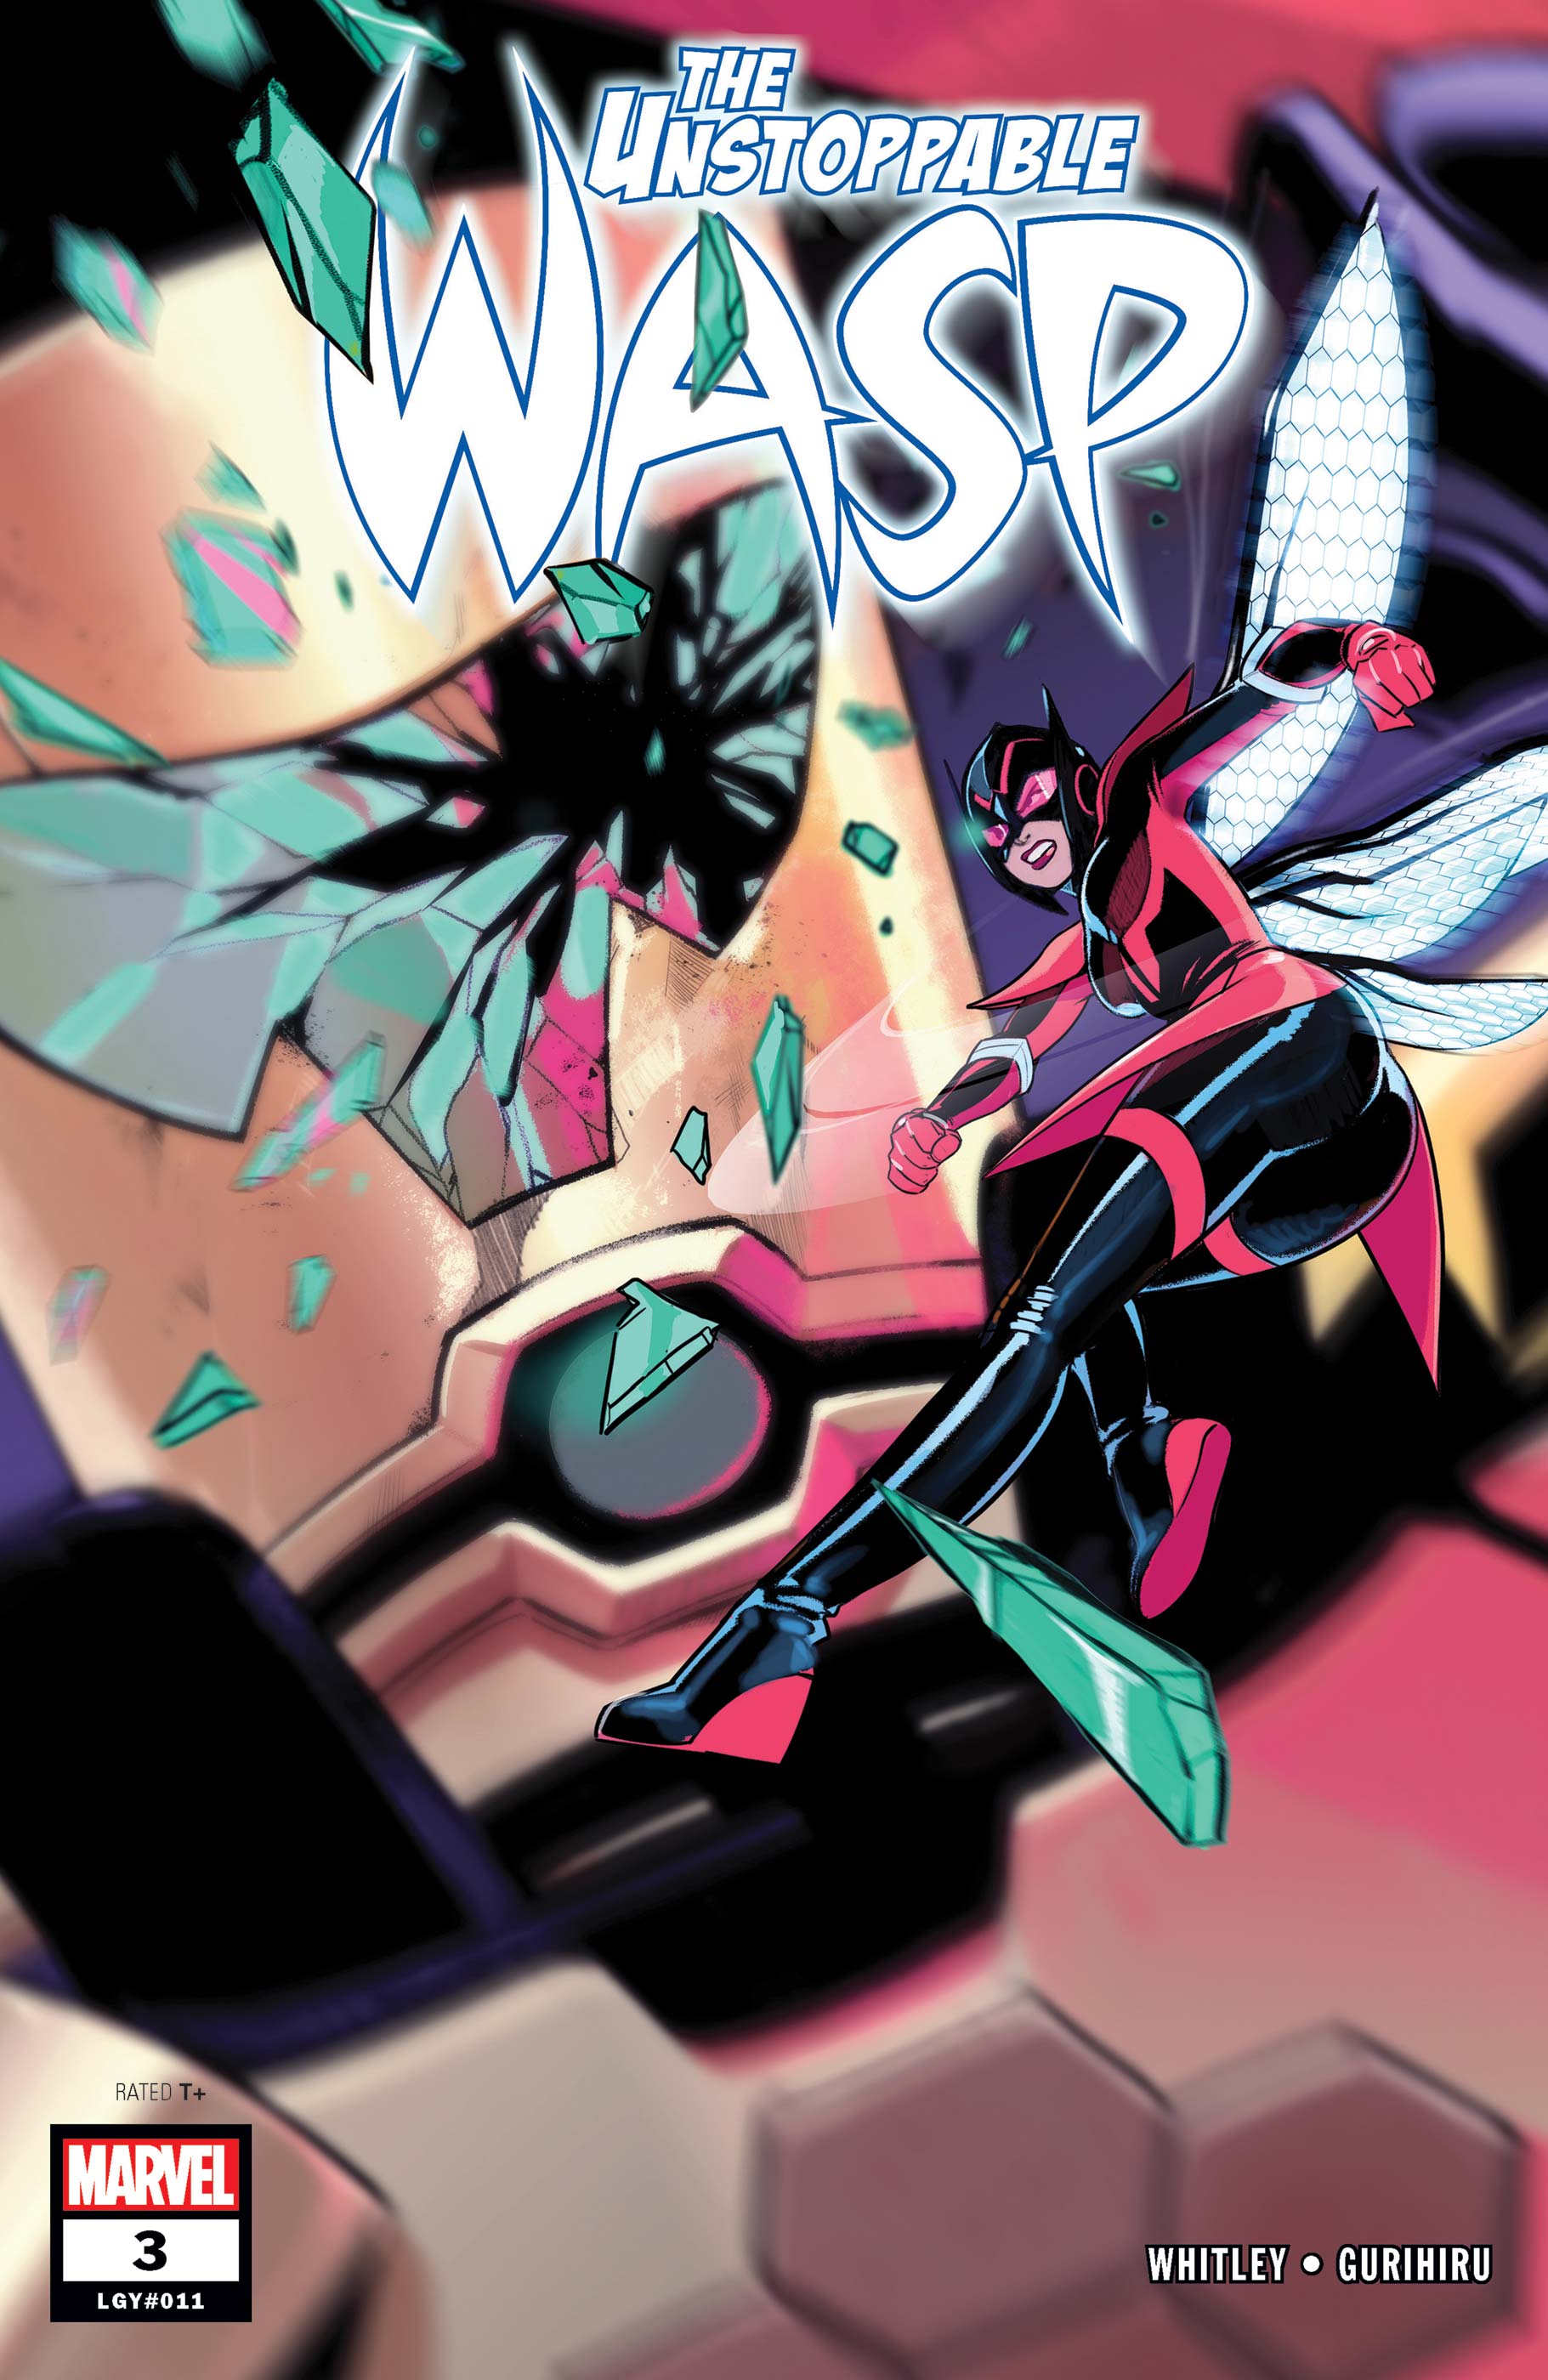 UNSTOPPABLE WASP #3 MARVEL COMIC BOOK 2017 NEW 1 MOON GIRL 